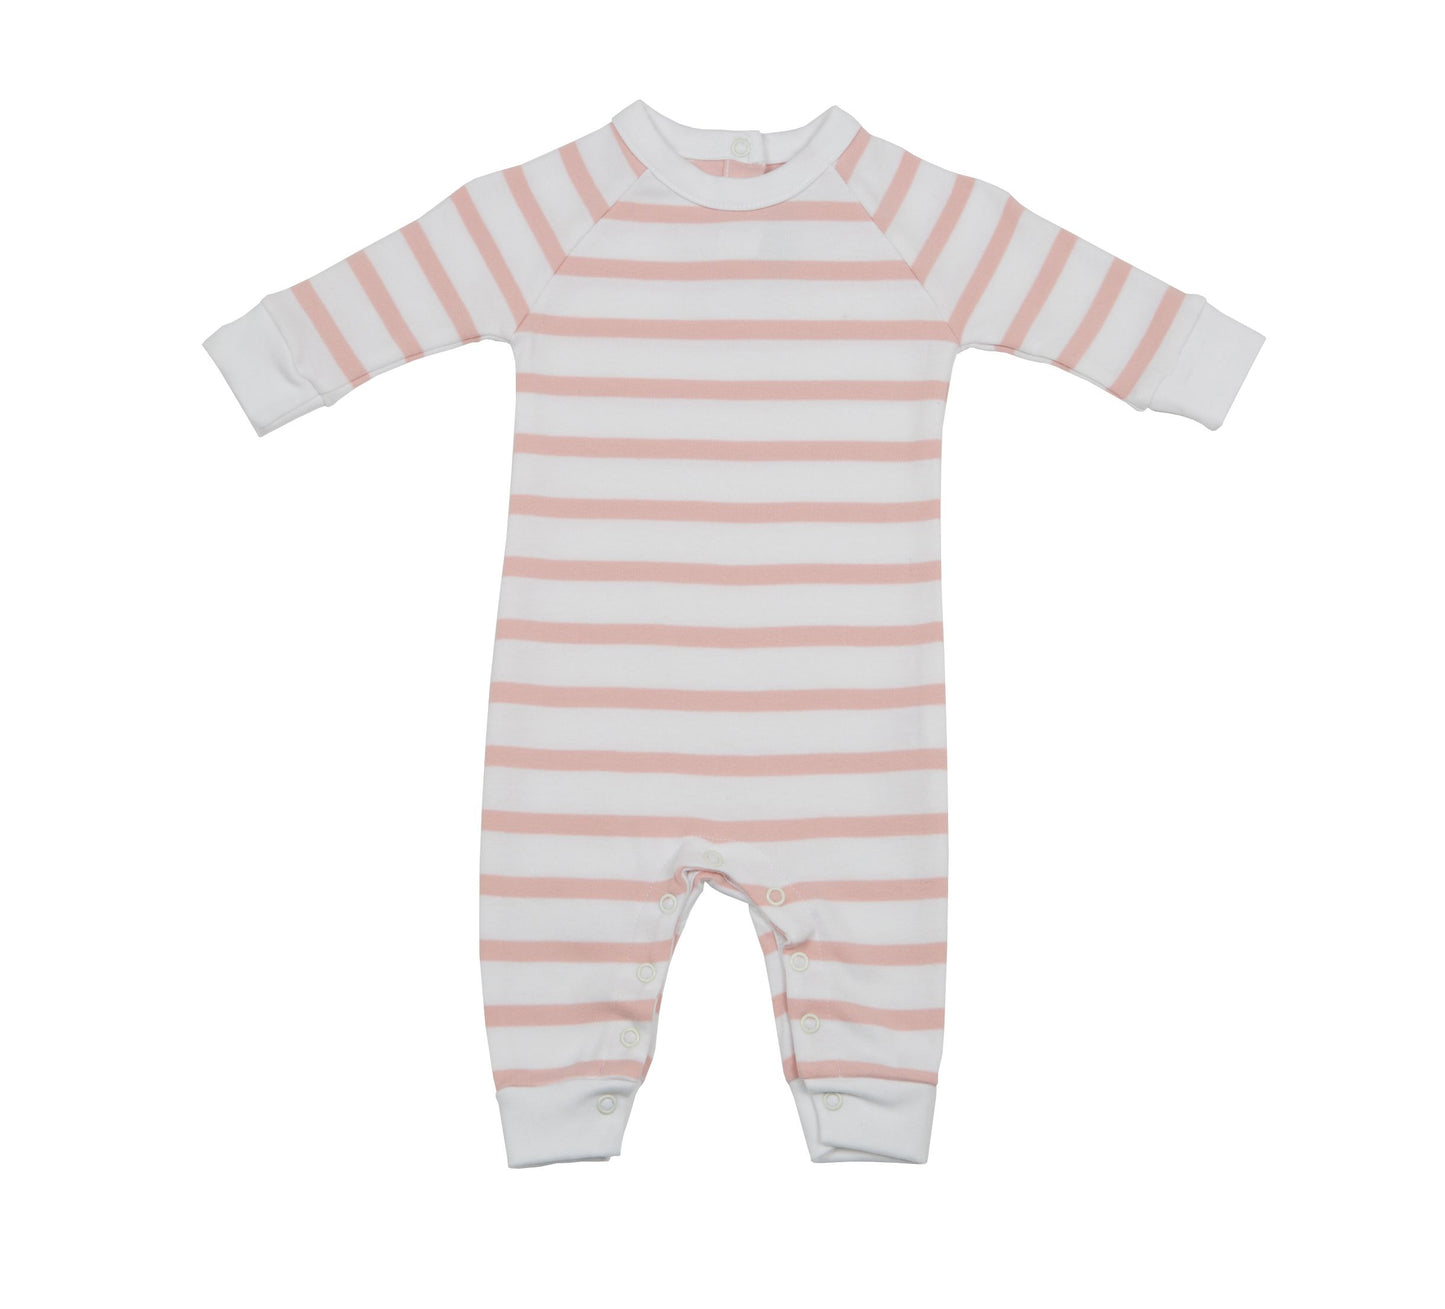 Dusty Pink and White Breton Striped All-in-One